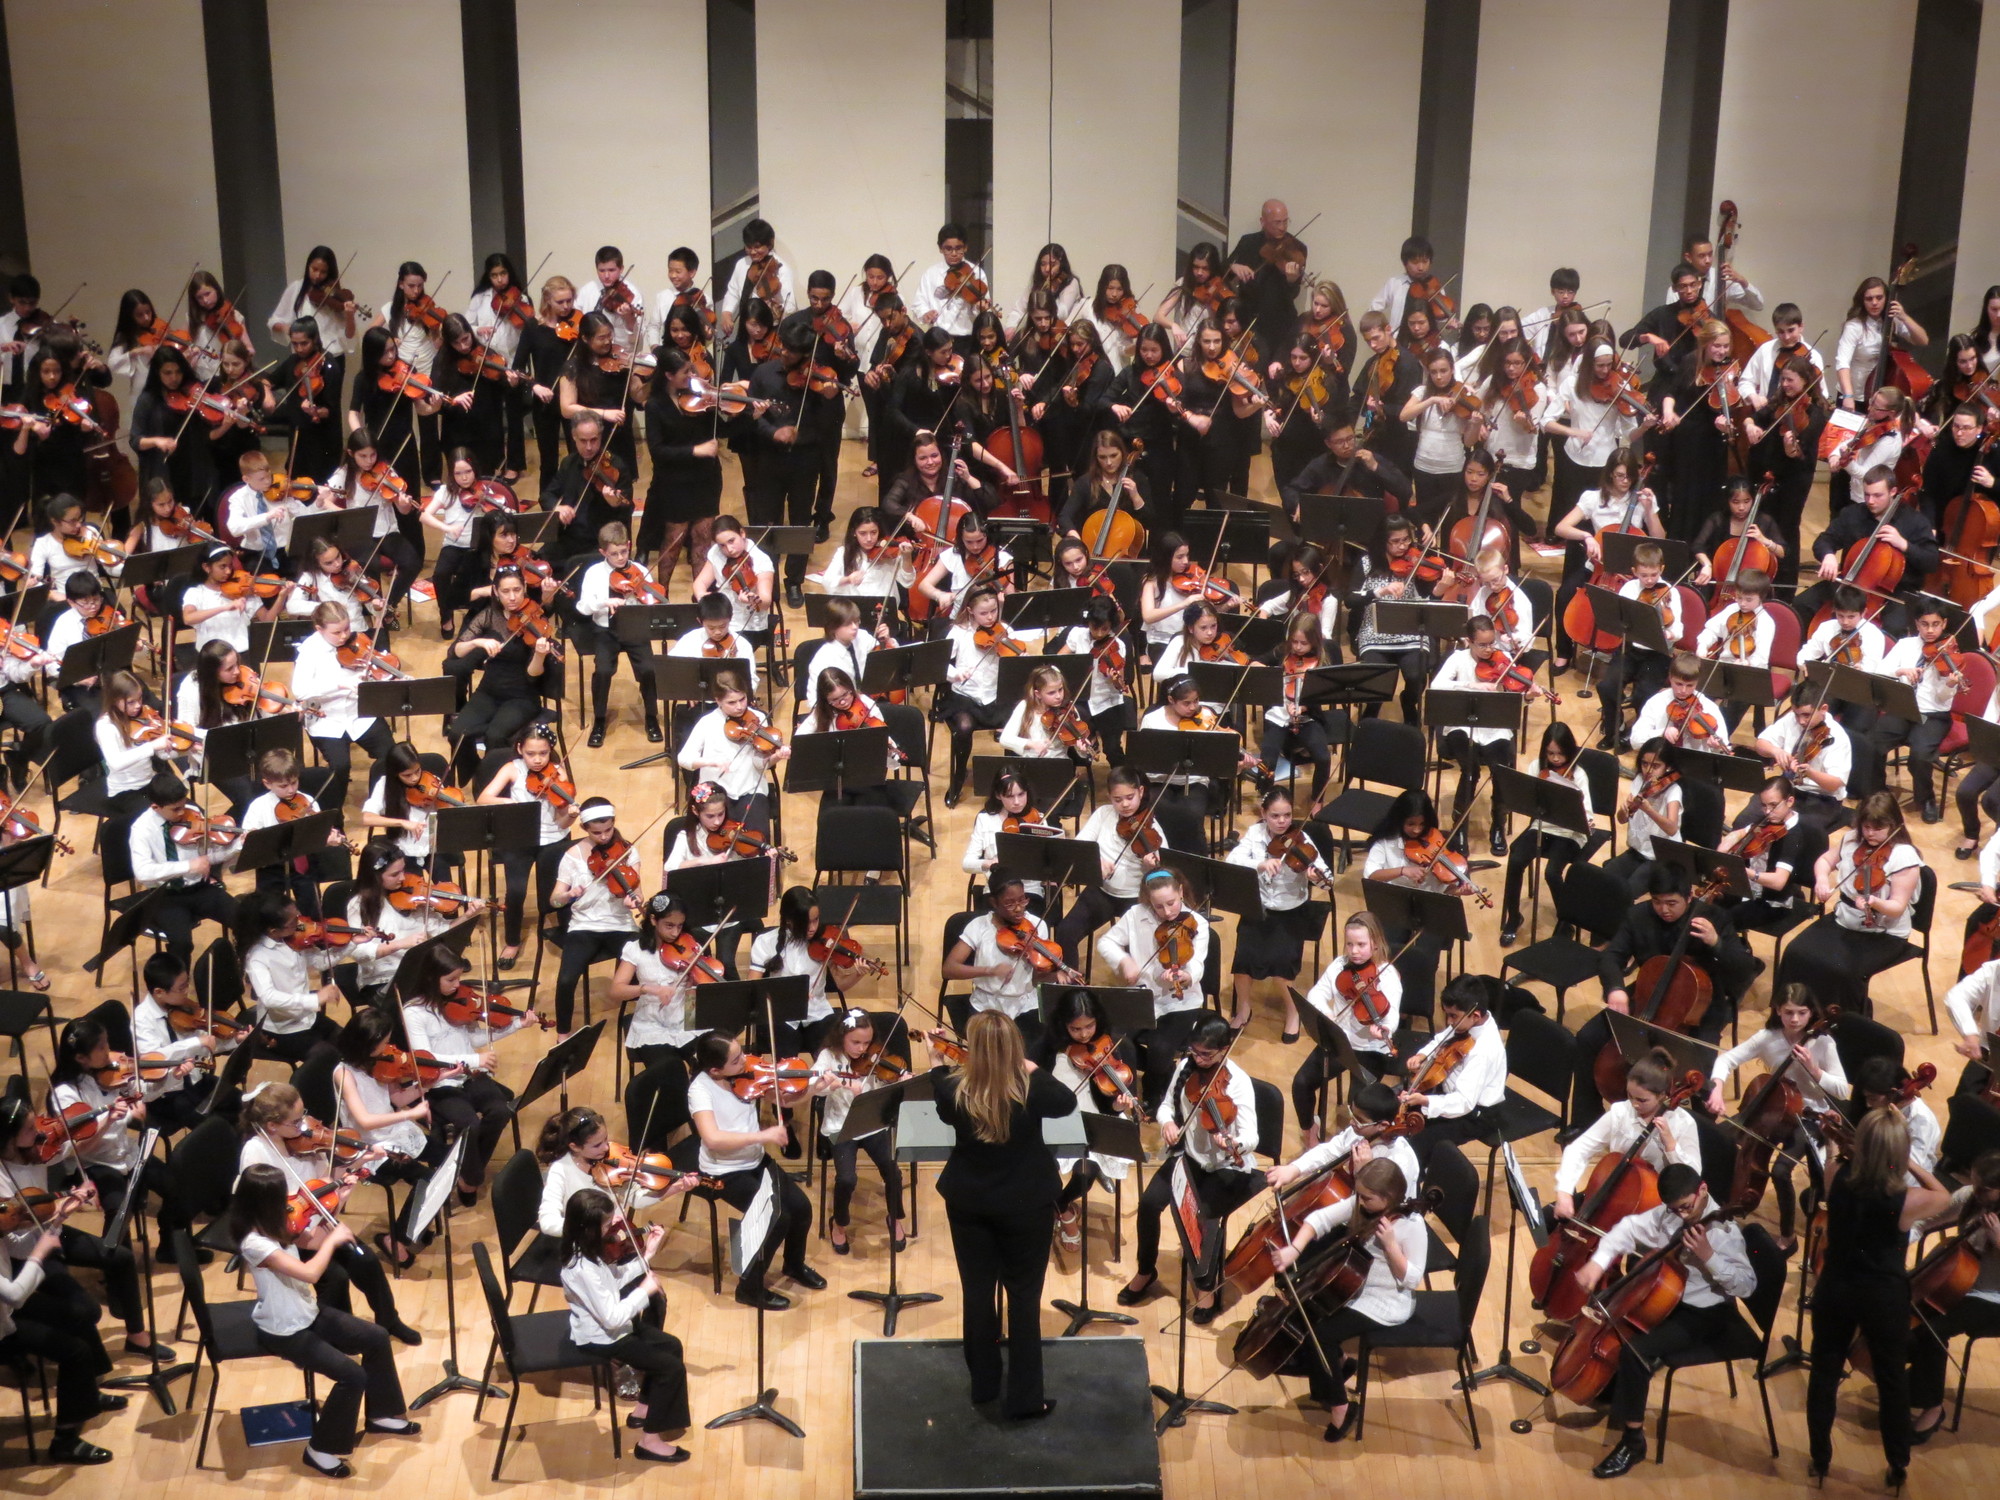 The East Meadow School District’s musical program, under the direction of Abby Behr, was recently listed among the NAMM Foundation’s “Best Communities for Music Education” in America. Pictured above, hundreds of student-musicians performed at the annual District Music Festival at the Tilles Center for the Performing Arts last winter.